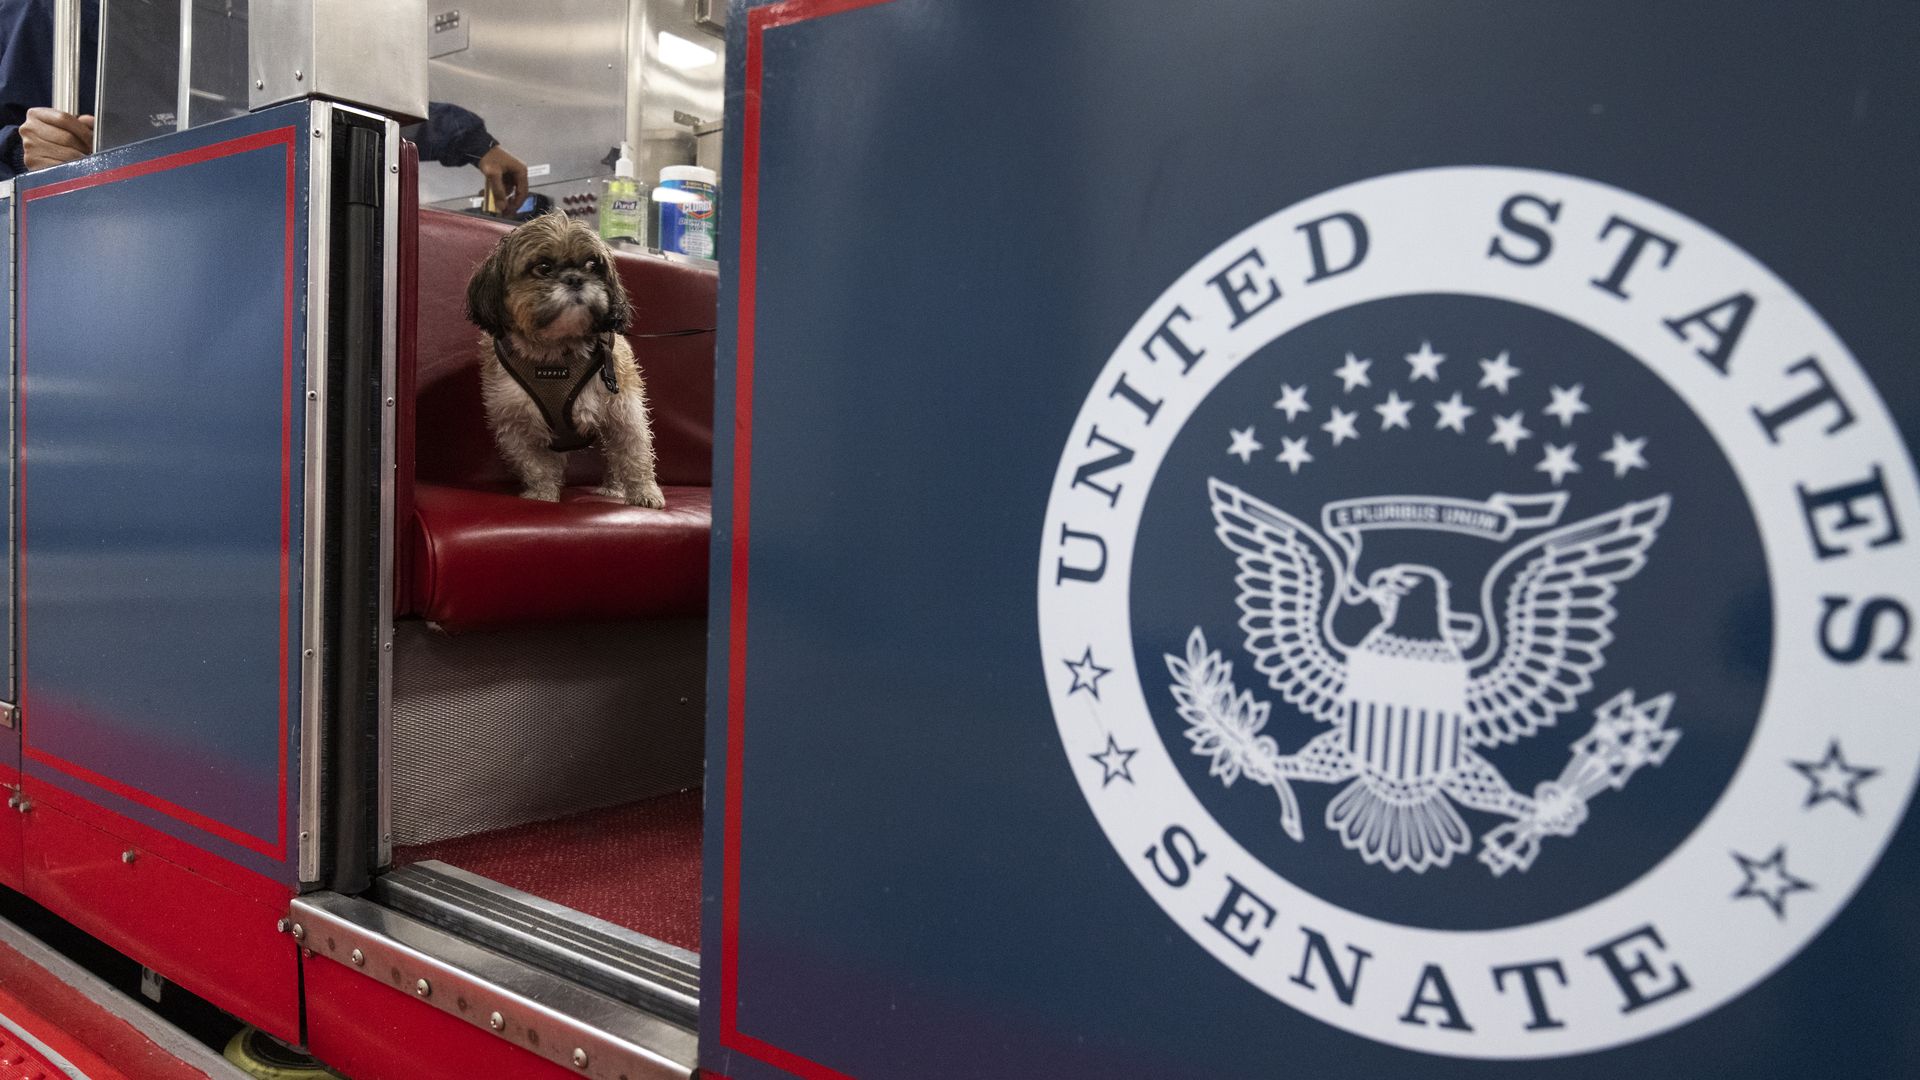 A rain-soaked dog is seen sitting in the Senate subway car.